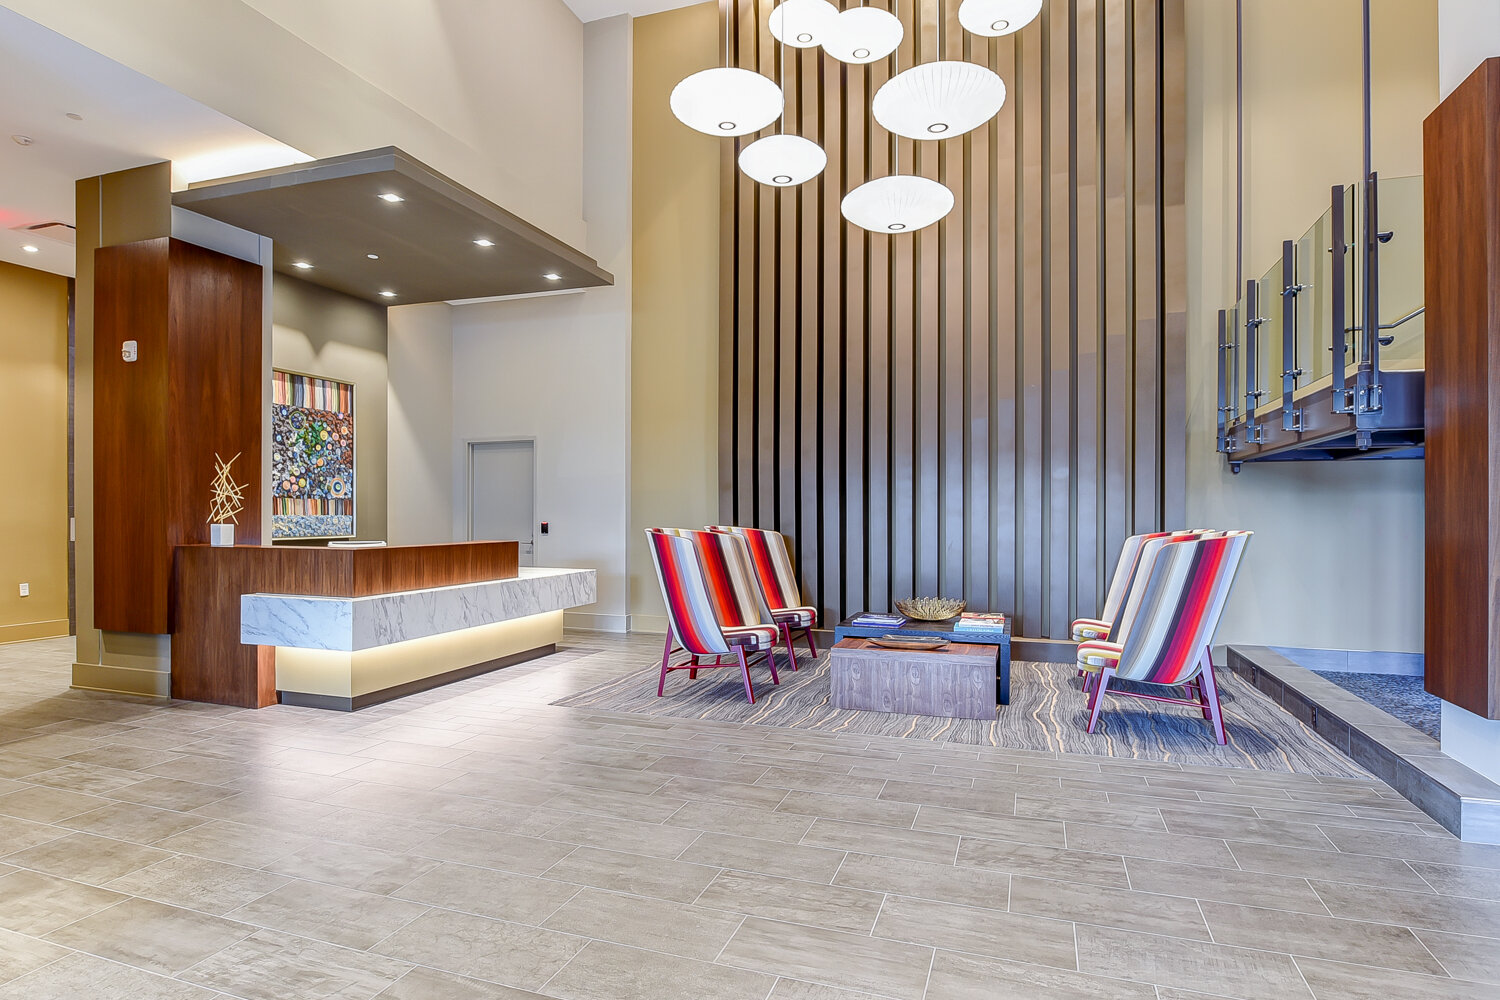 The-Crest-at-Skyland-Town-Center-Lobby-Concierge-Desk-and-Seating.jpg